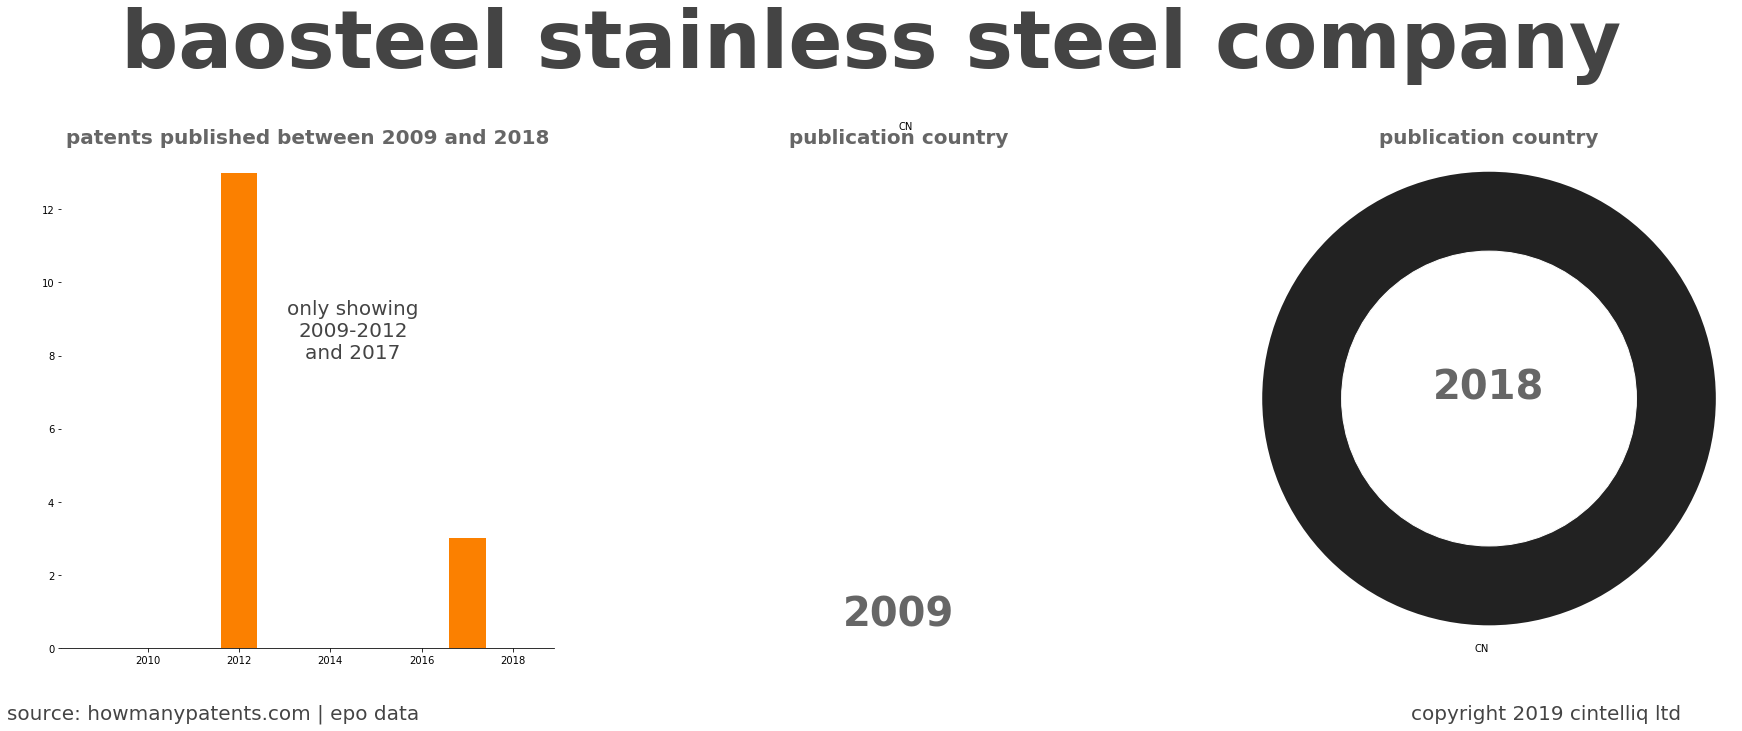 summary of patents for Baosteel Stainless Steel Company